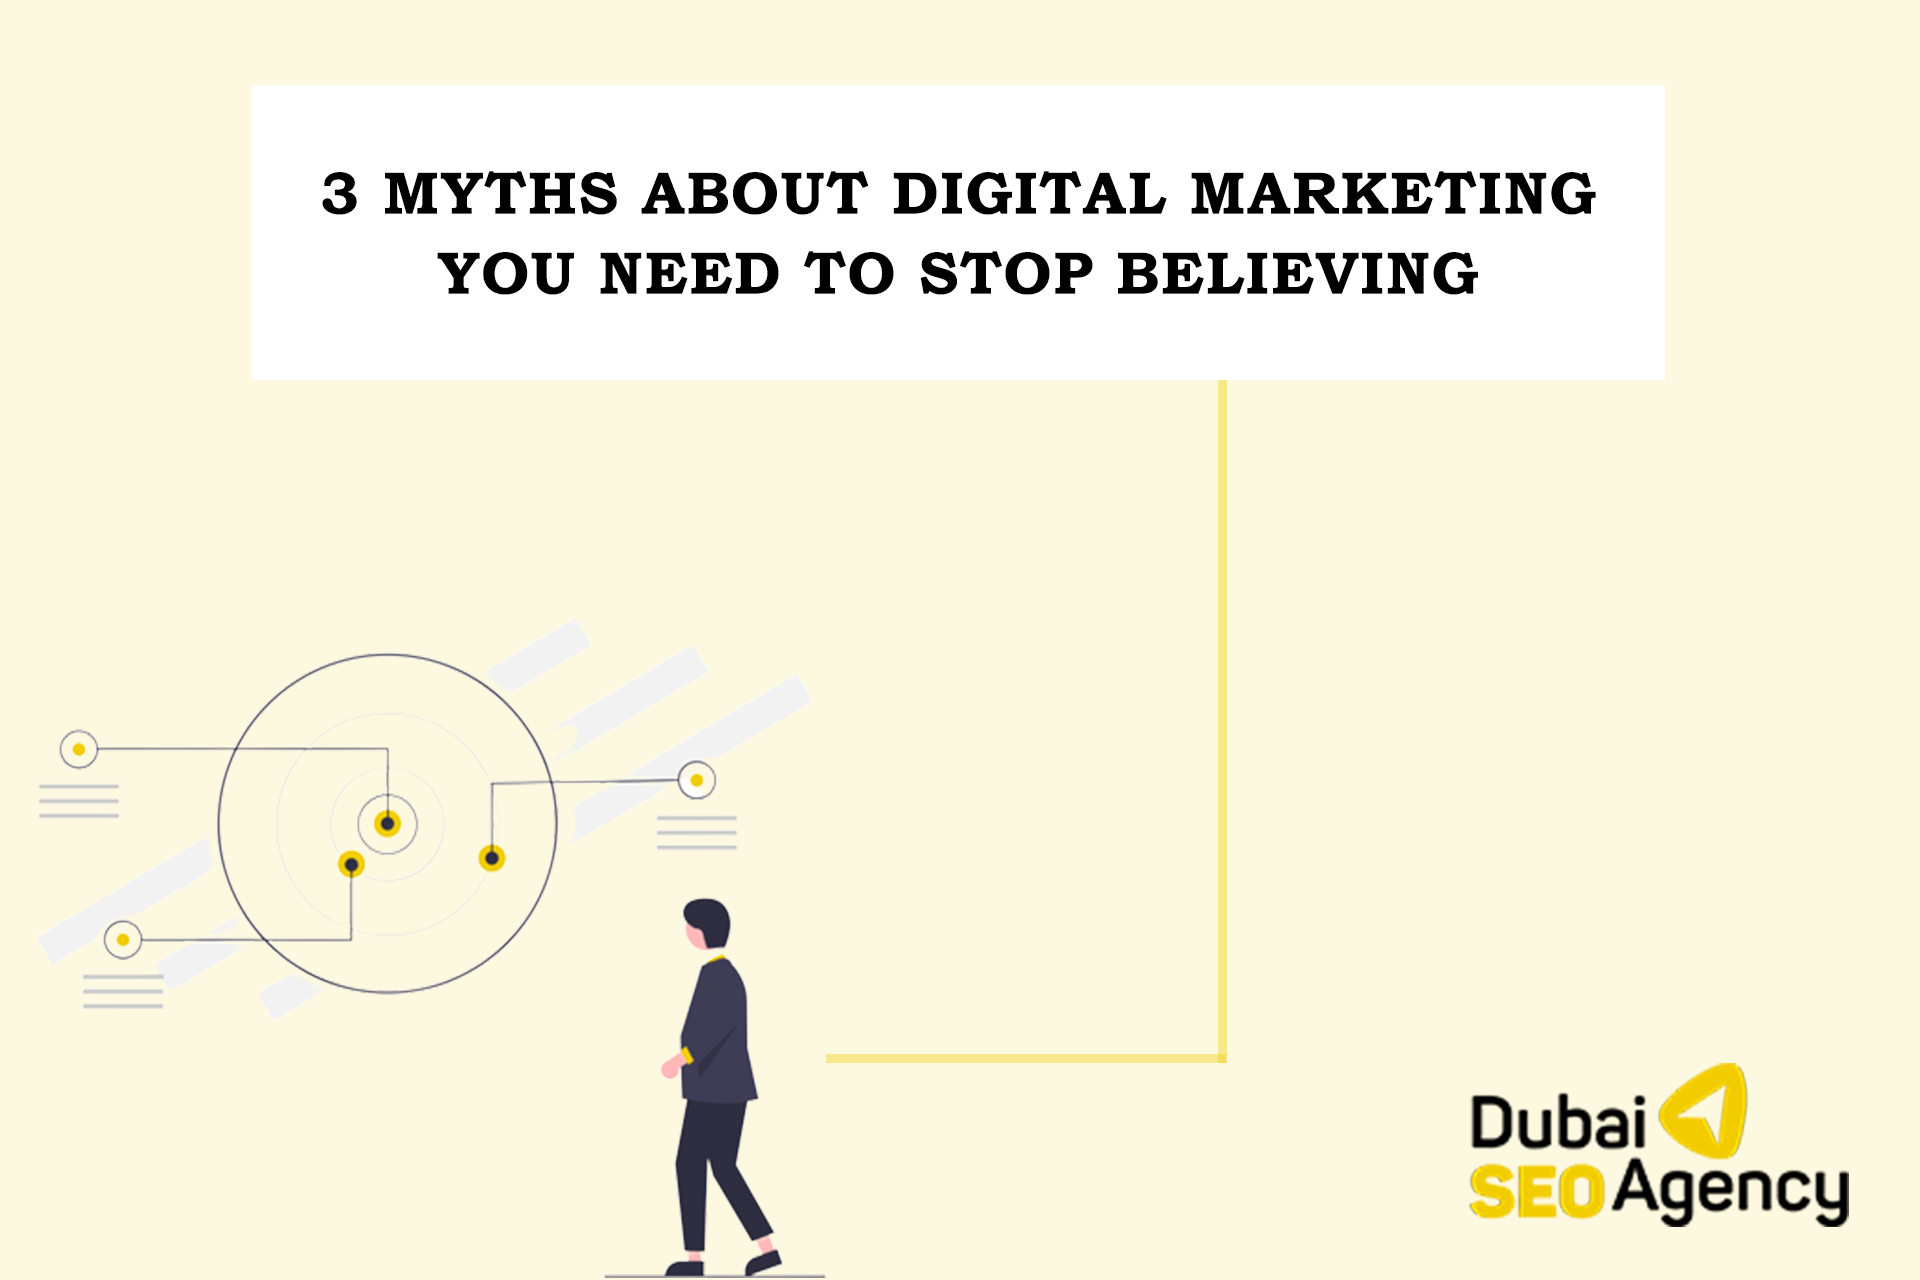 3 Myths About Digital Marketing You Need to Stop Believing